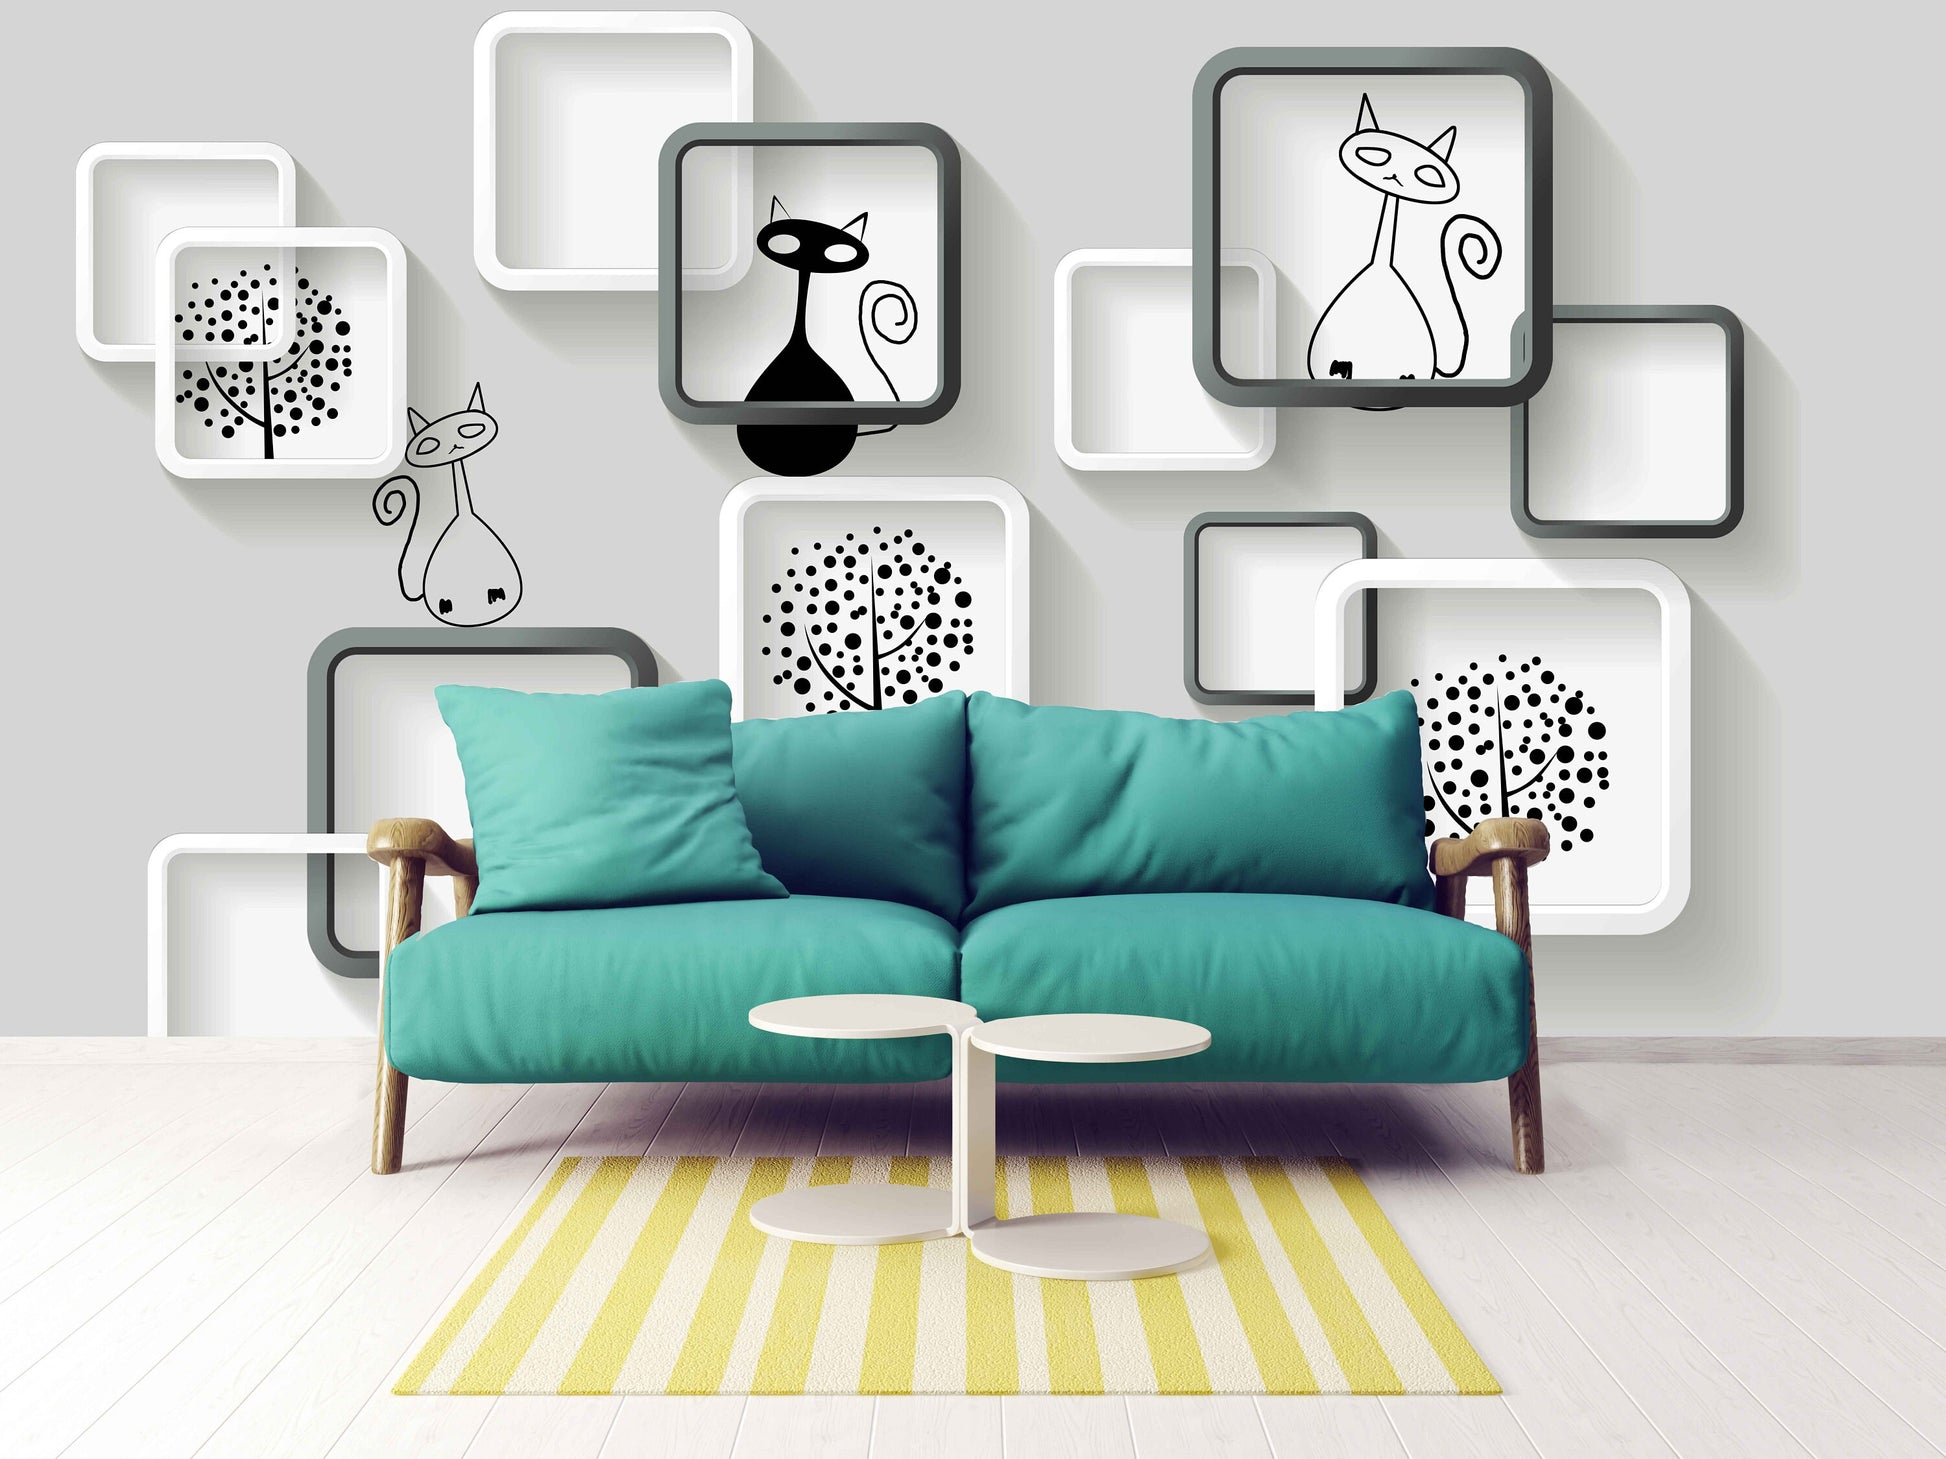 Geometric Peel and stick wallpaper 3d wall mural Abstract wallpaper Self adhesive mural removable wallpaper